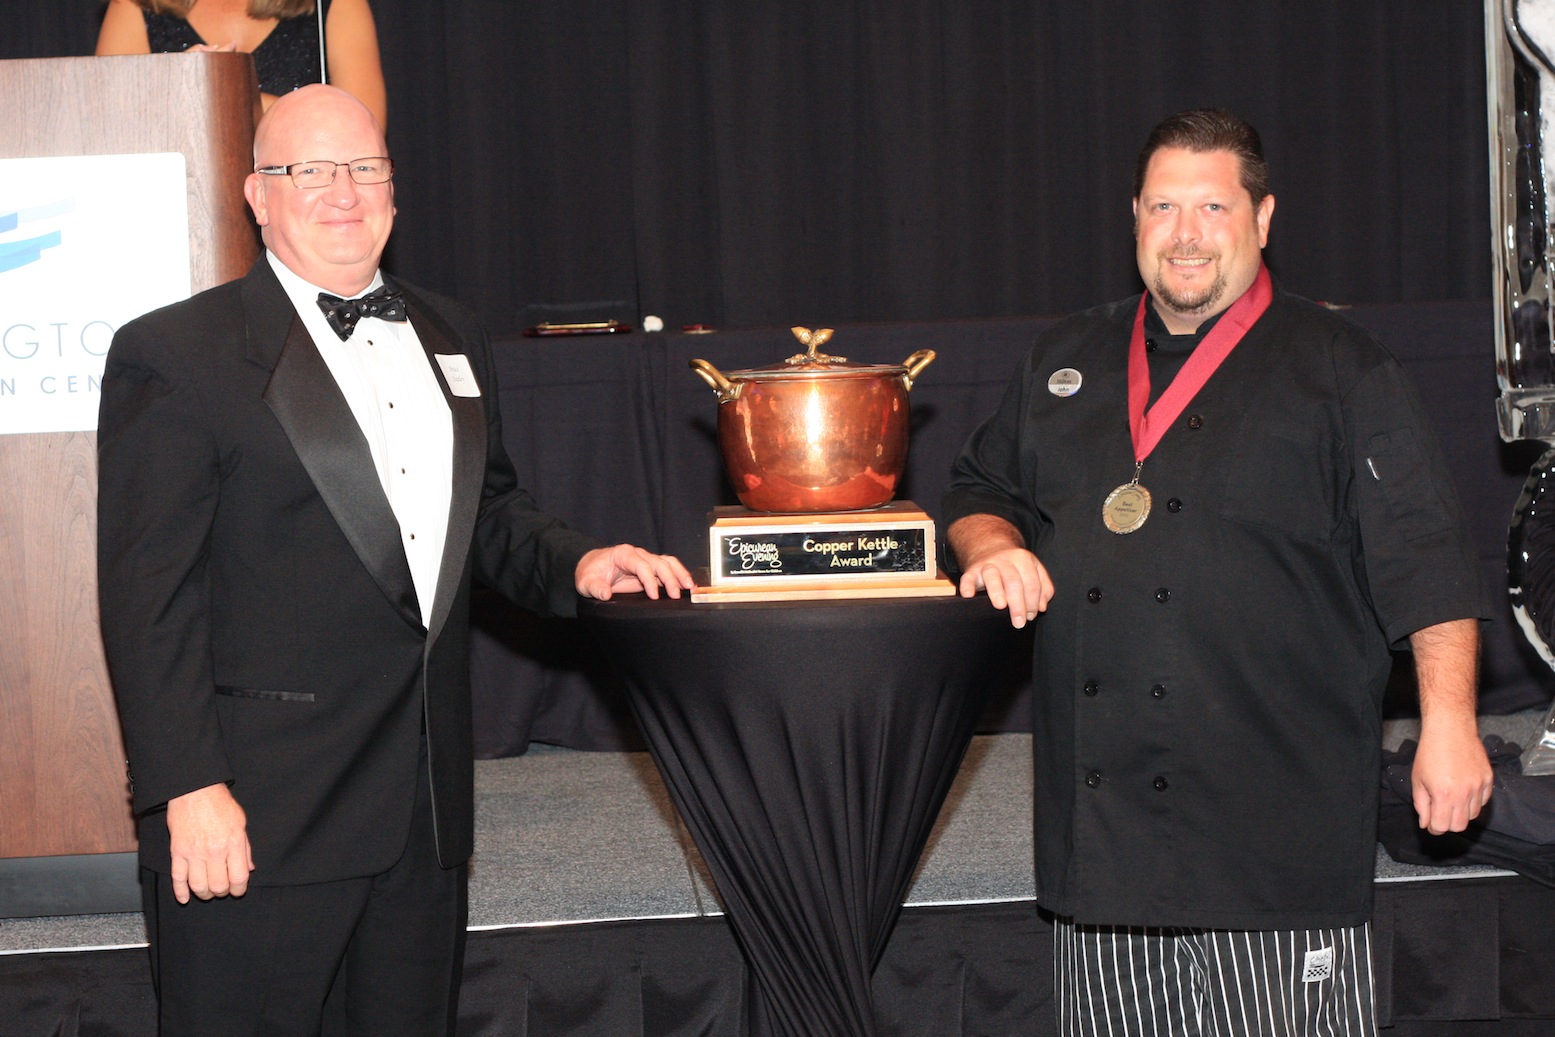 Historic Wilmington's Epicurean Evening, the coveted Copper Kettle Award